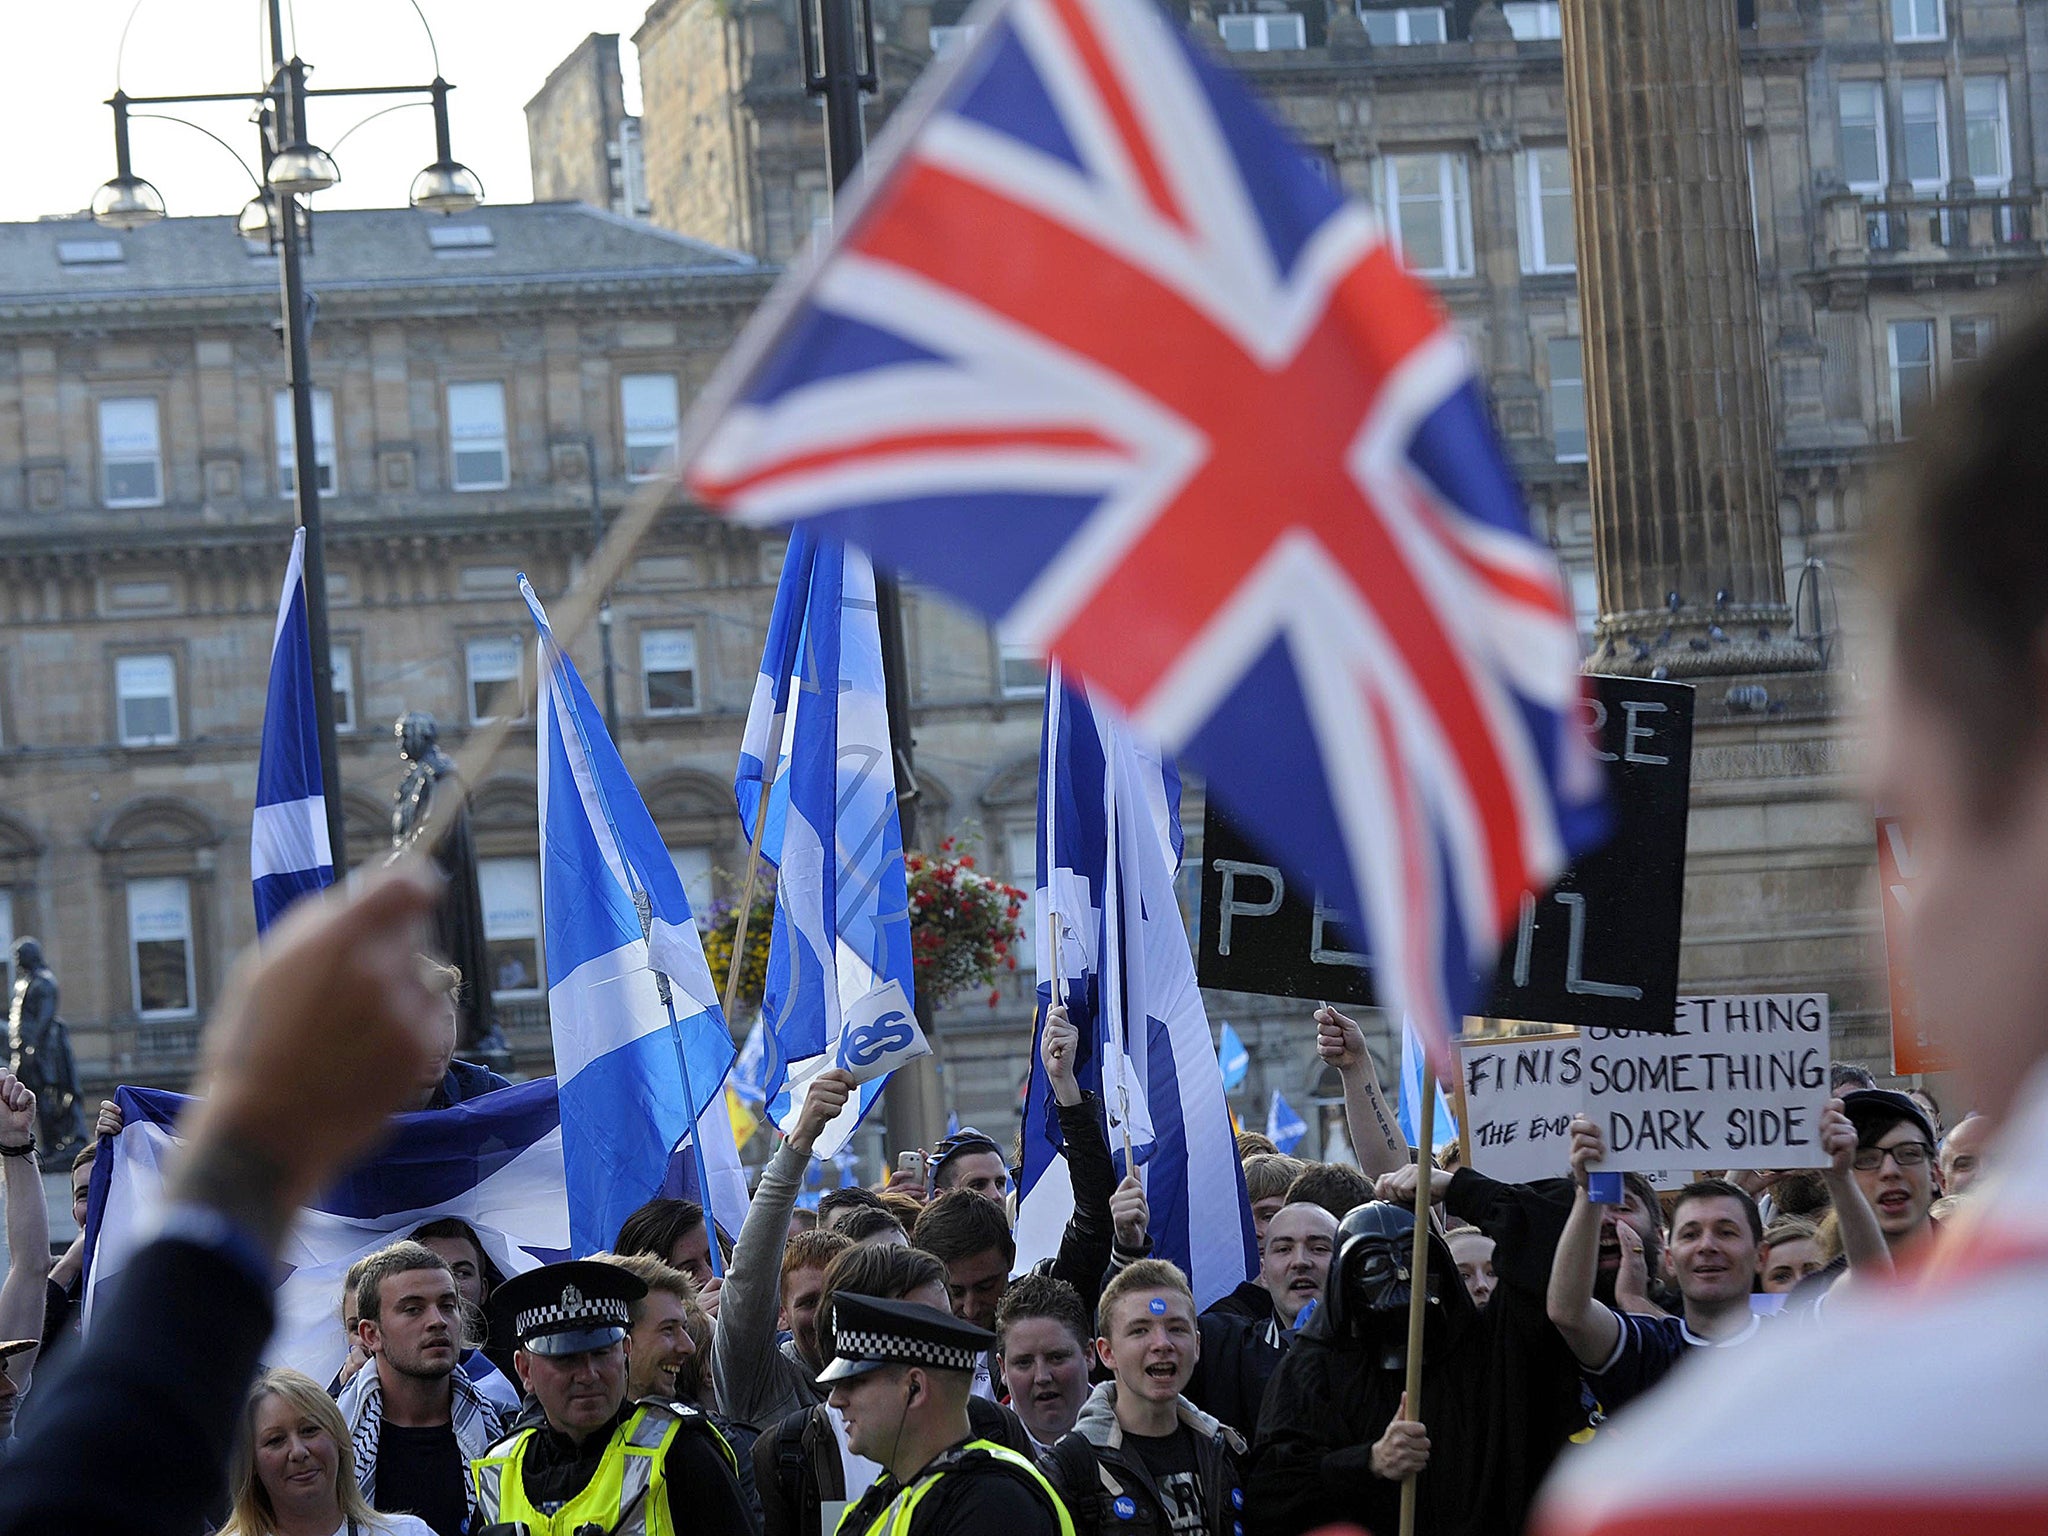 Yes and No campaign supporters face off in Glasgow's George Square, in Scotland